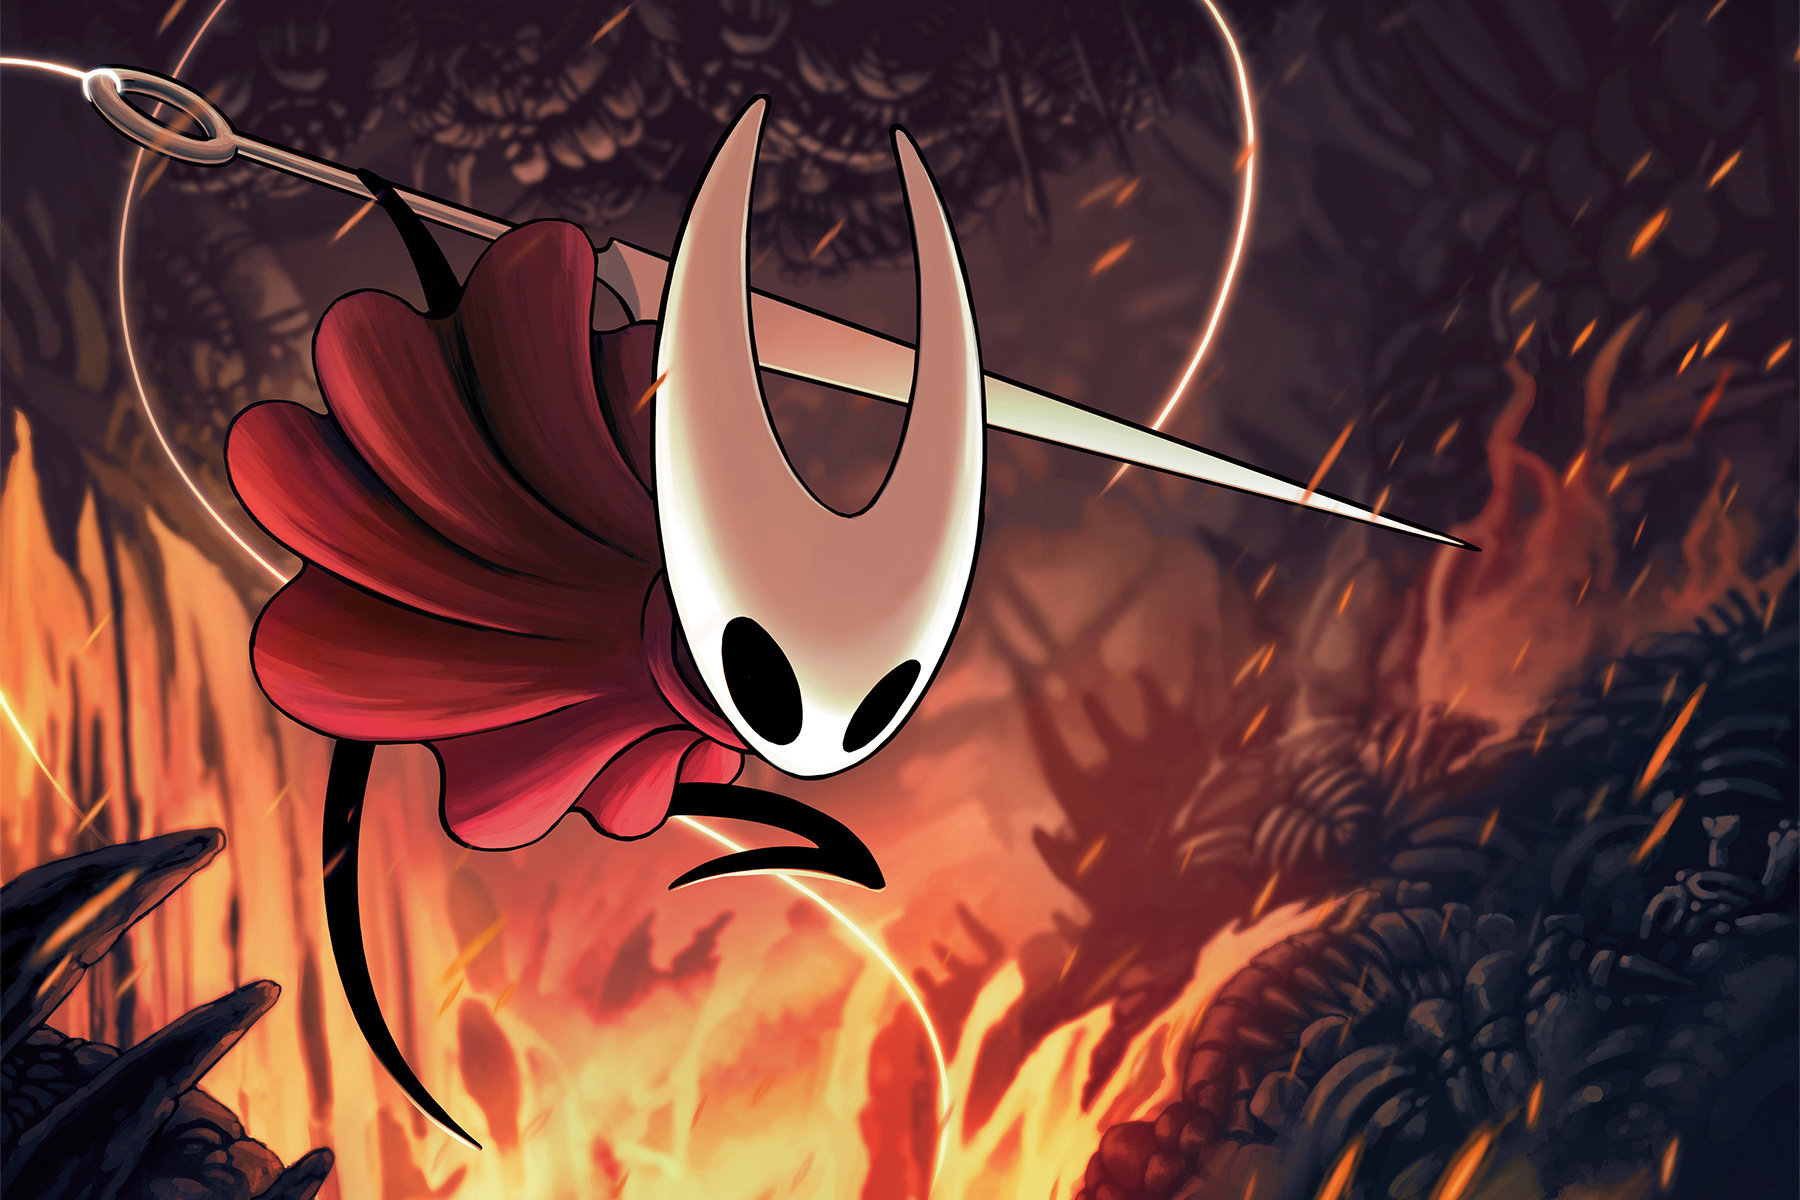 Silksong is a full blown sequel to Hollow Knight